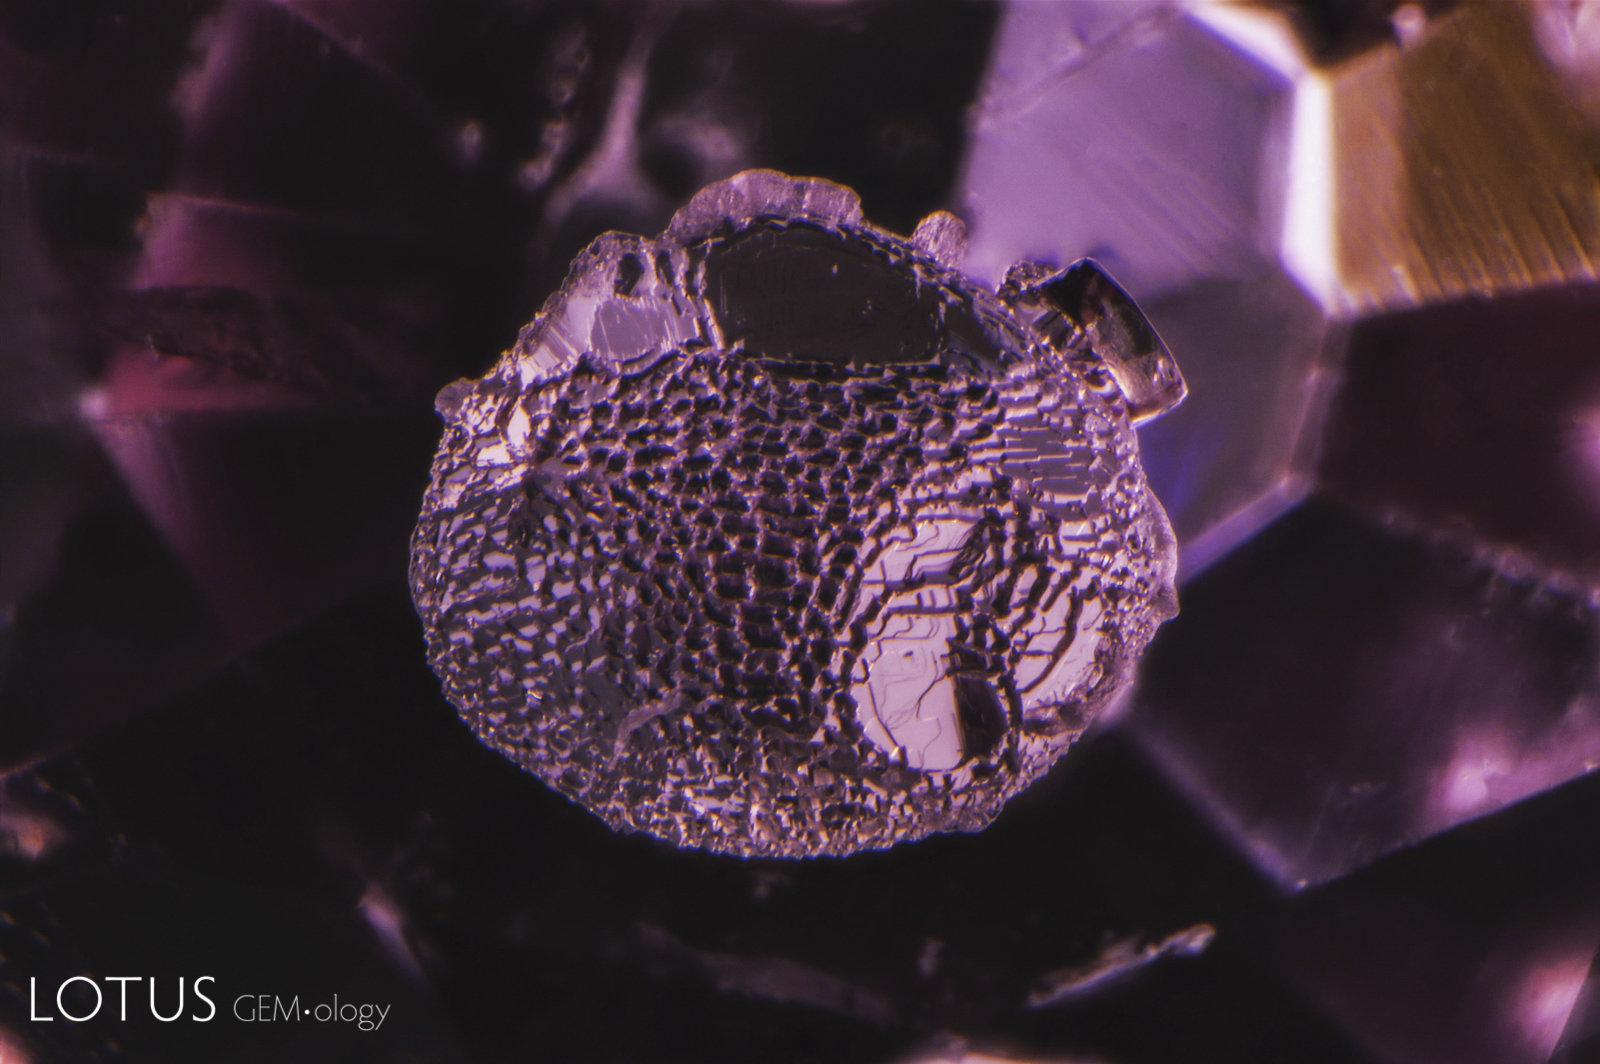 This rounded and corroded protogenetic pyrite inclusion in a Sri Lankan spinel shows a deeply pitted surface. 